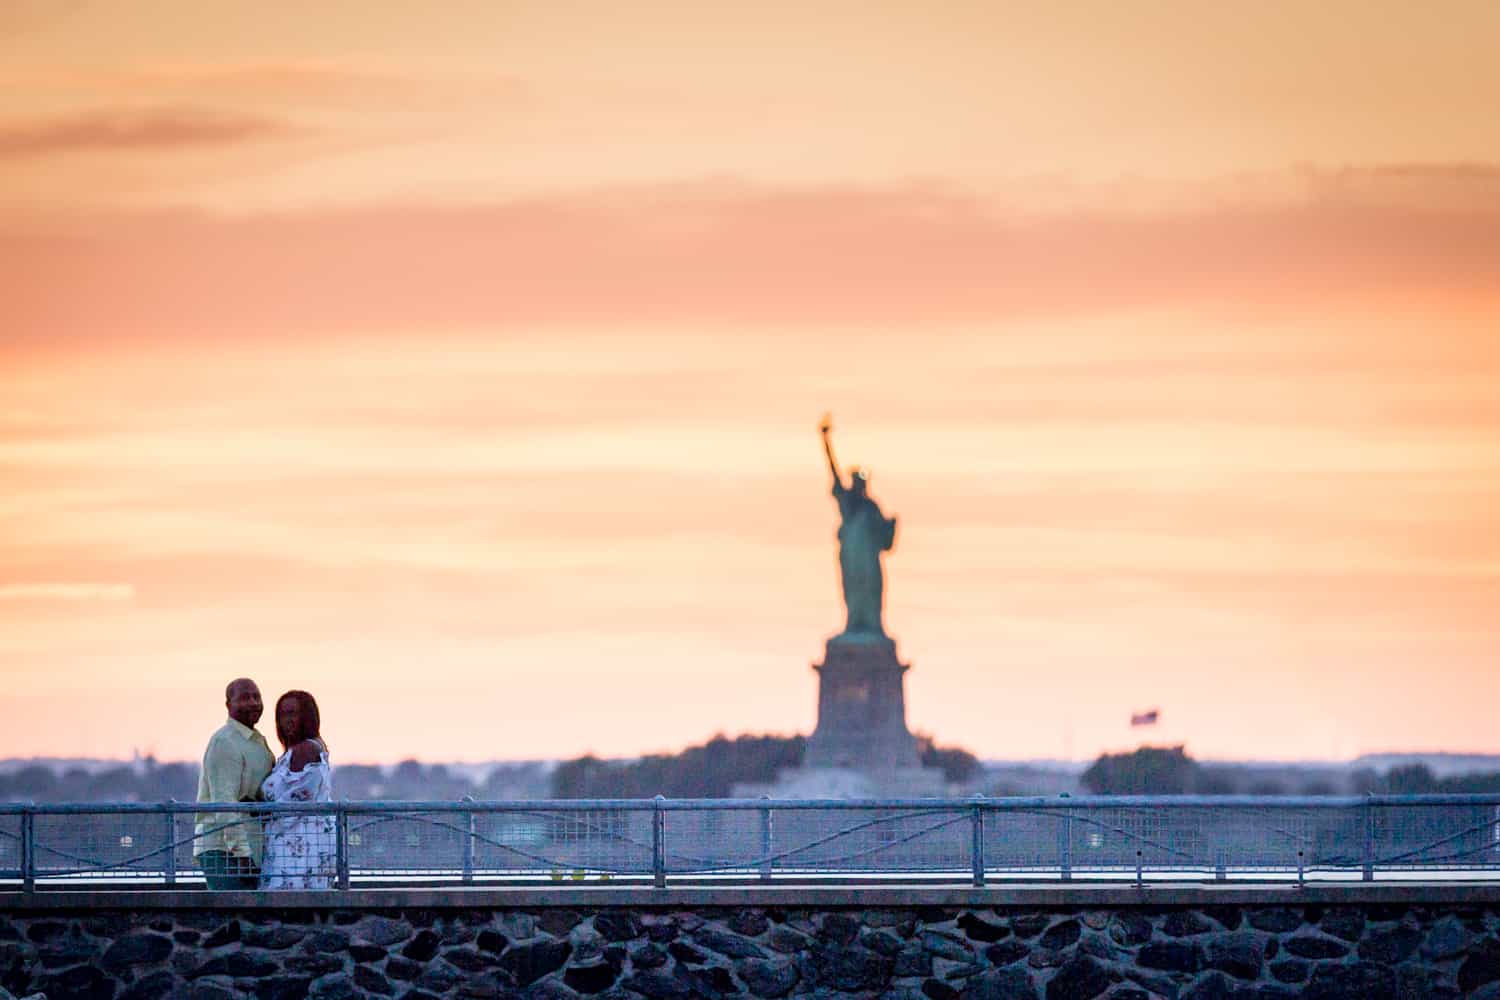 Couple on dock with Statue of Liberty in background at sunset